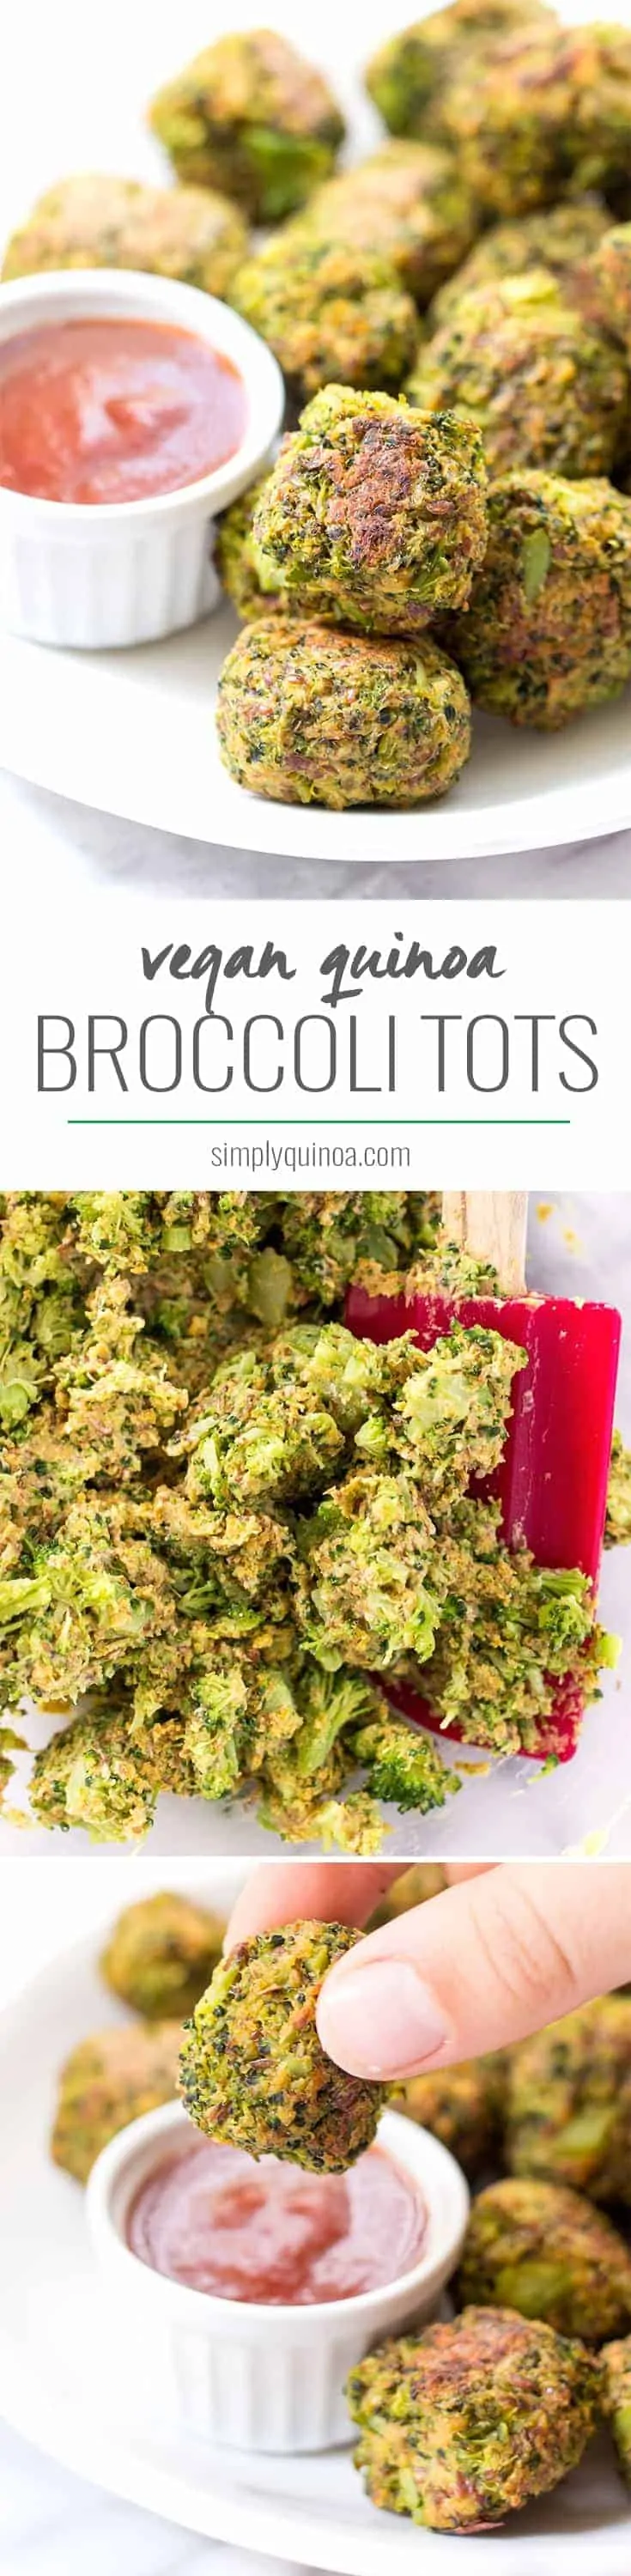 VEGAN QUINOA BROCCOLI TOTS -- with nutritional yeast, quinoa flour and other healthy ingredients!